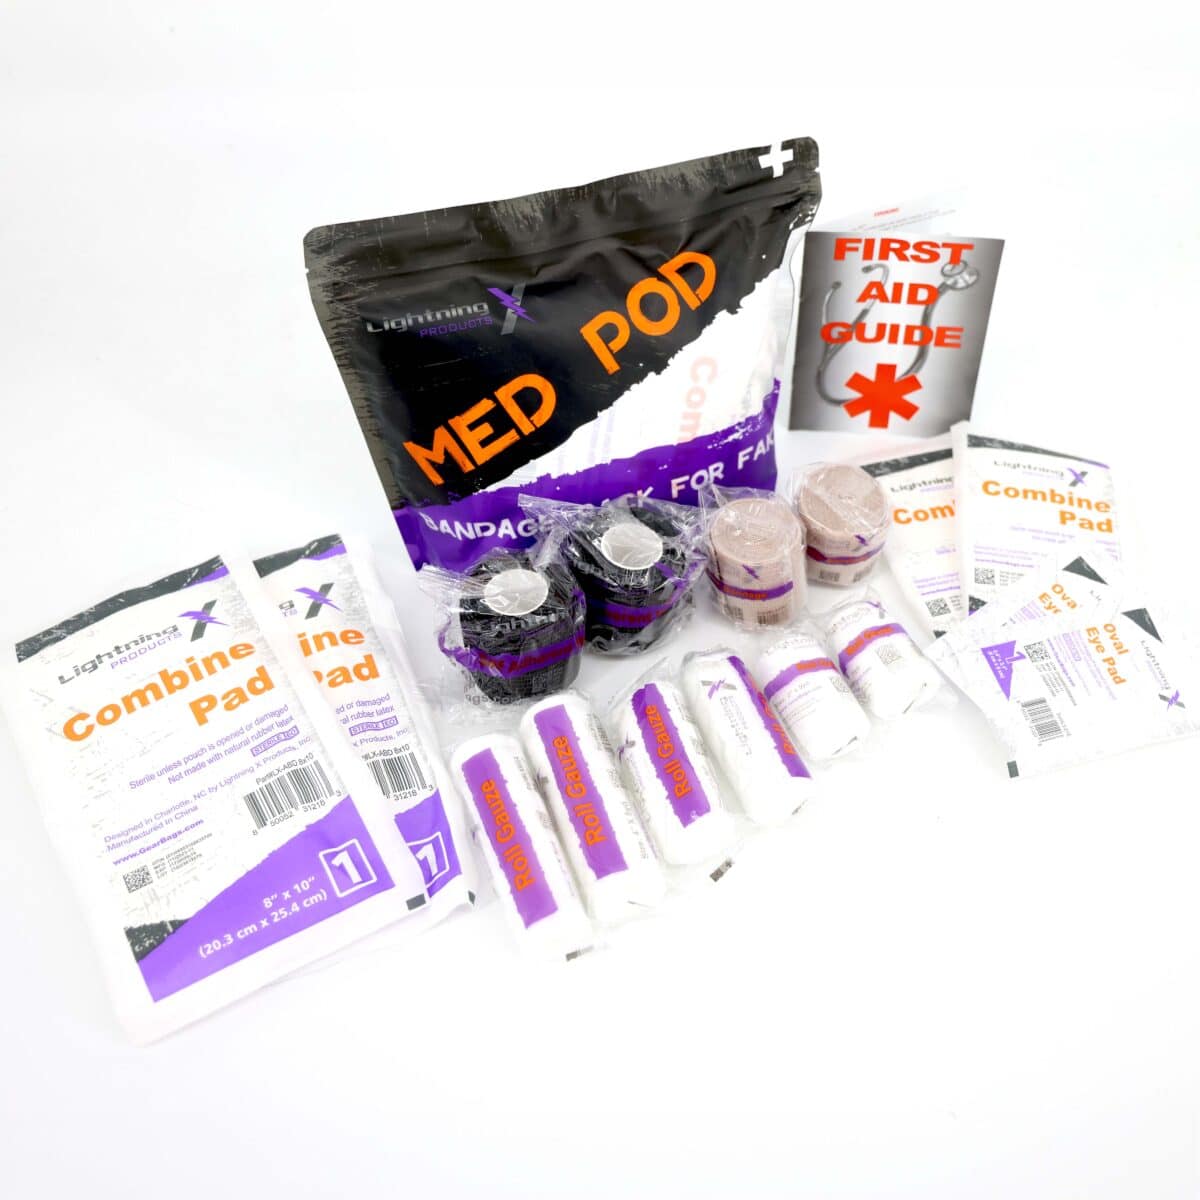 lightning x bandage refill kit for first aid includes 2", 3", 4" conforming stretch rolled gauze, elastic ace bandage, self-adherent coban cling wrap, 5" x 9", 8" x 10" abd combine pad, eye pads & first aid guide booklet